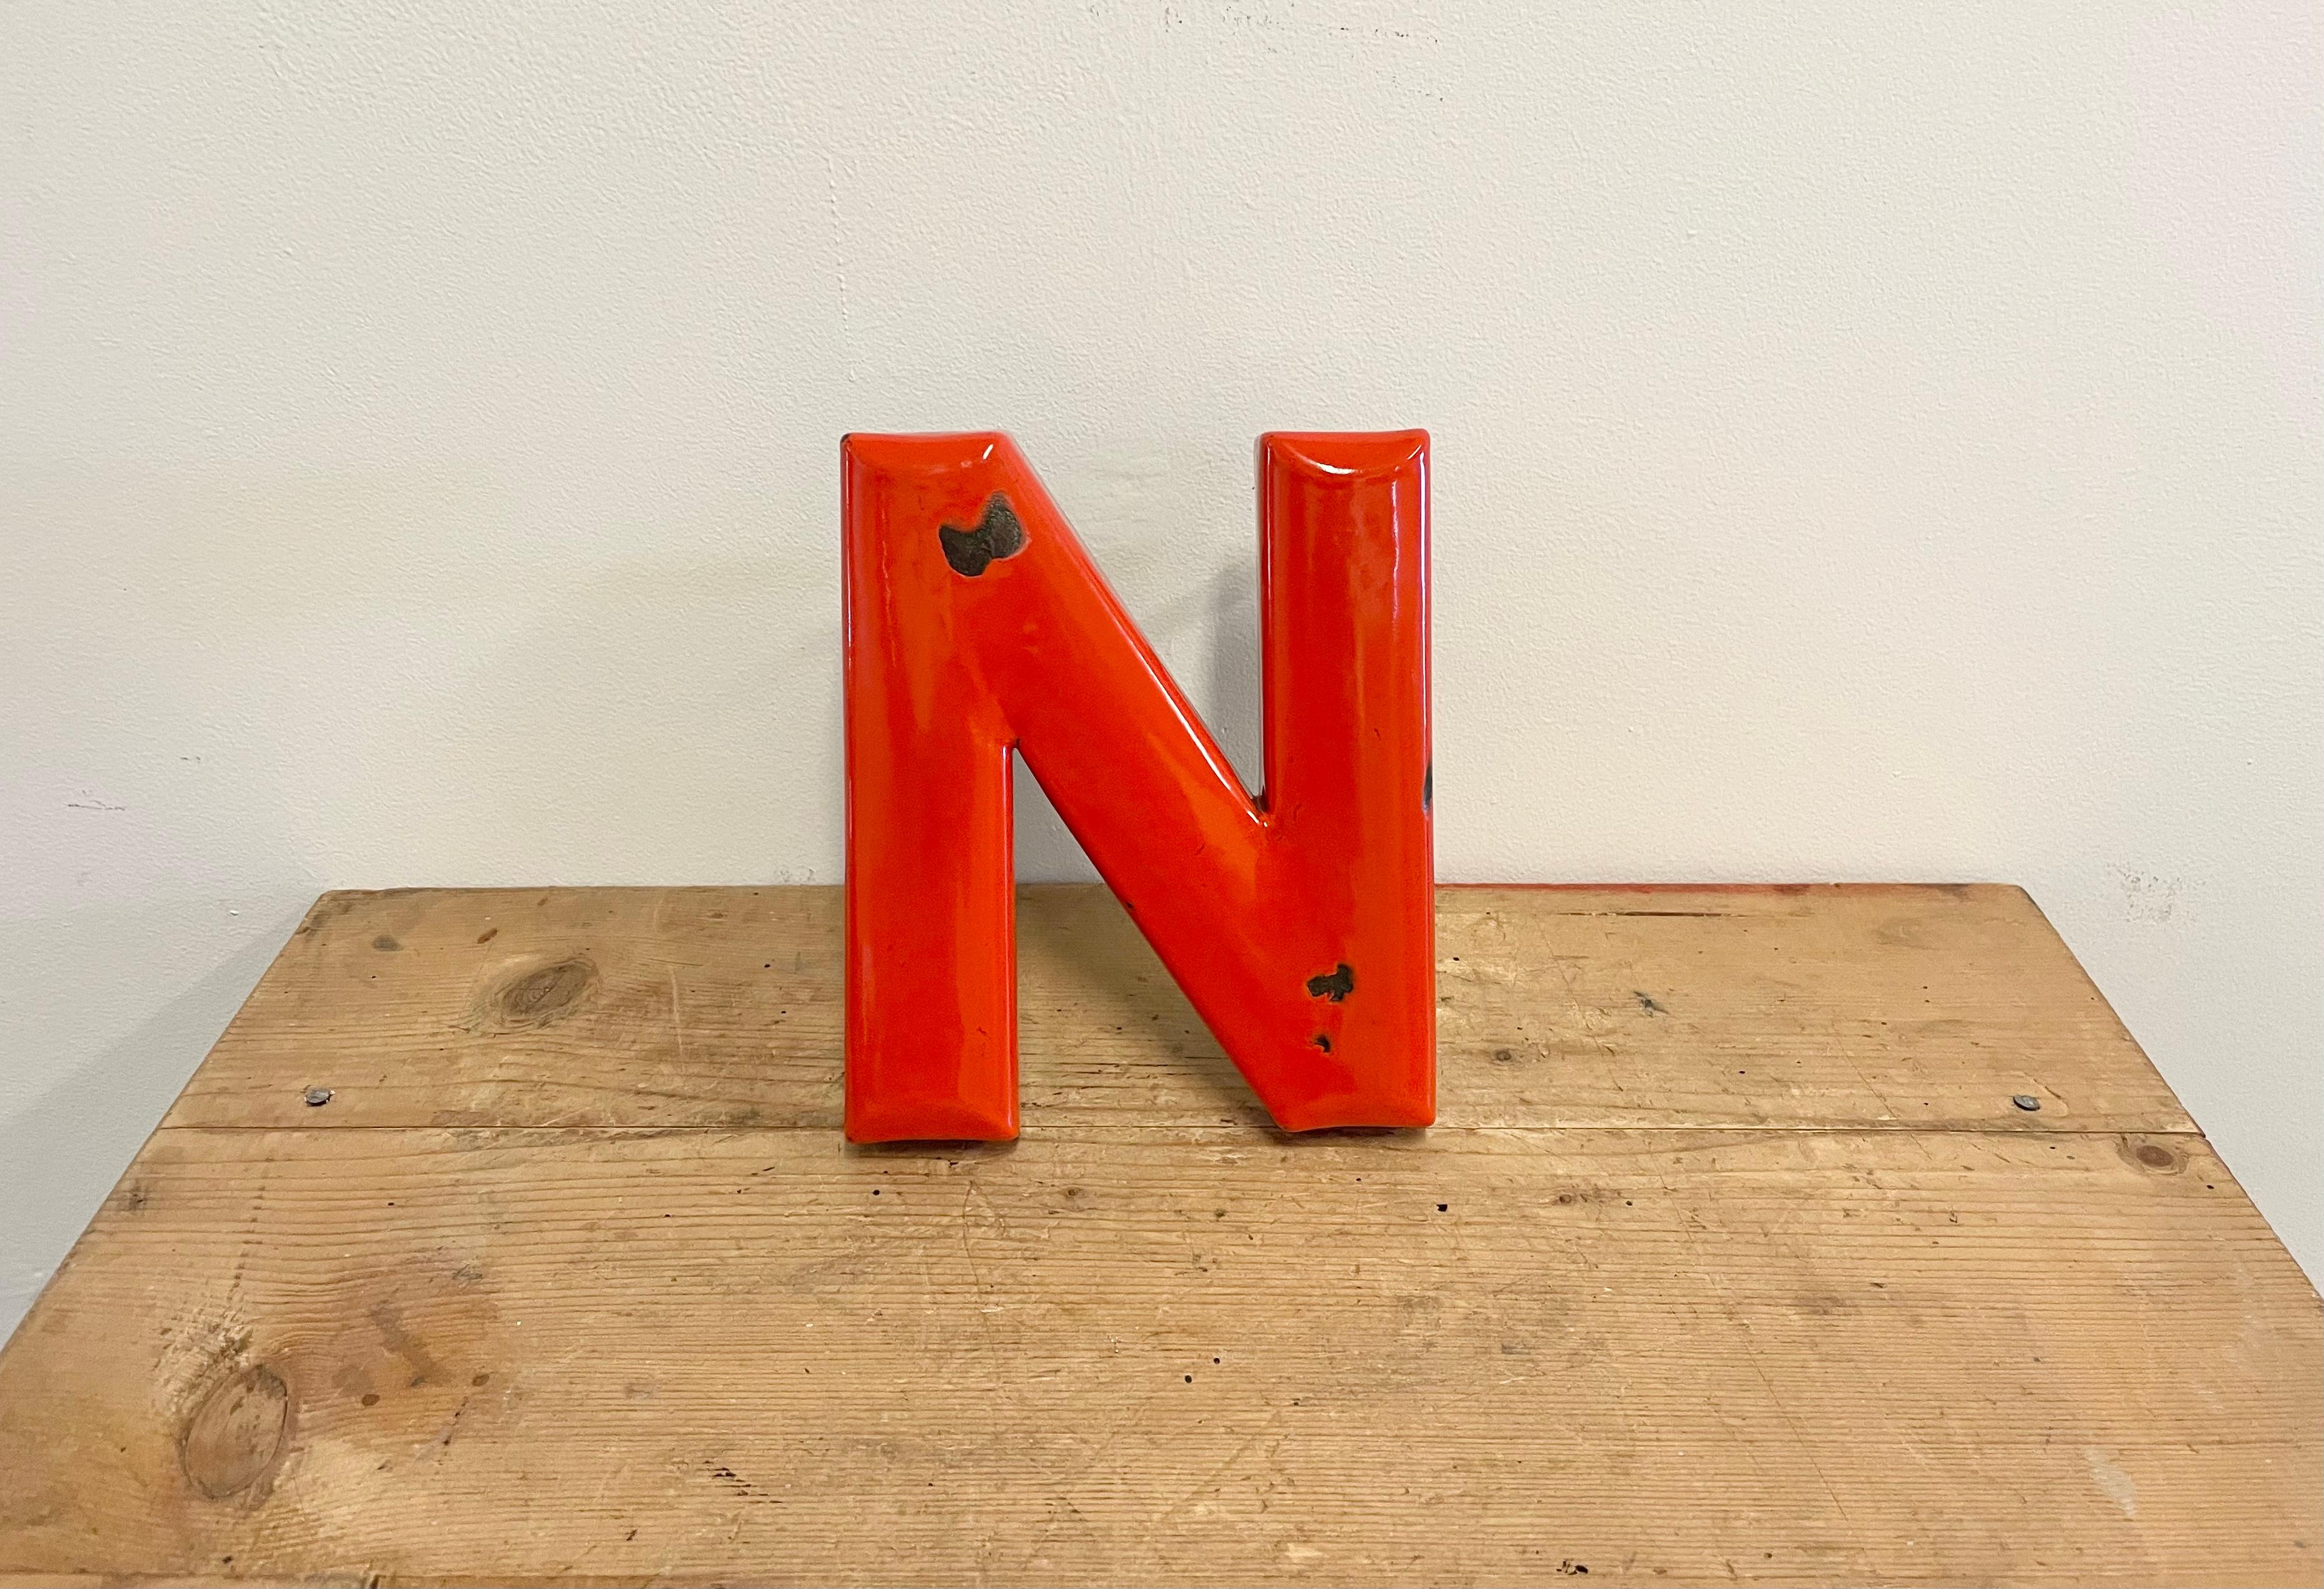 This vintage industrial enameled letter N was made during the 1930s and comes from the old advertising banner.